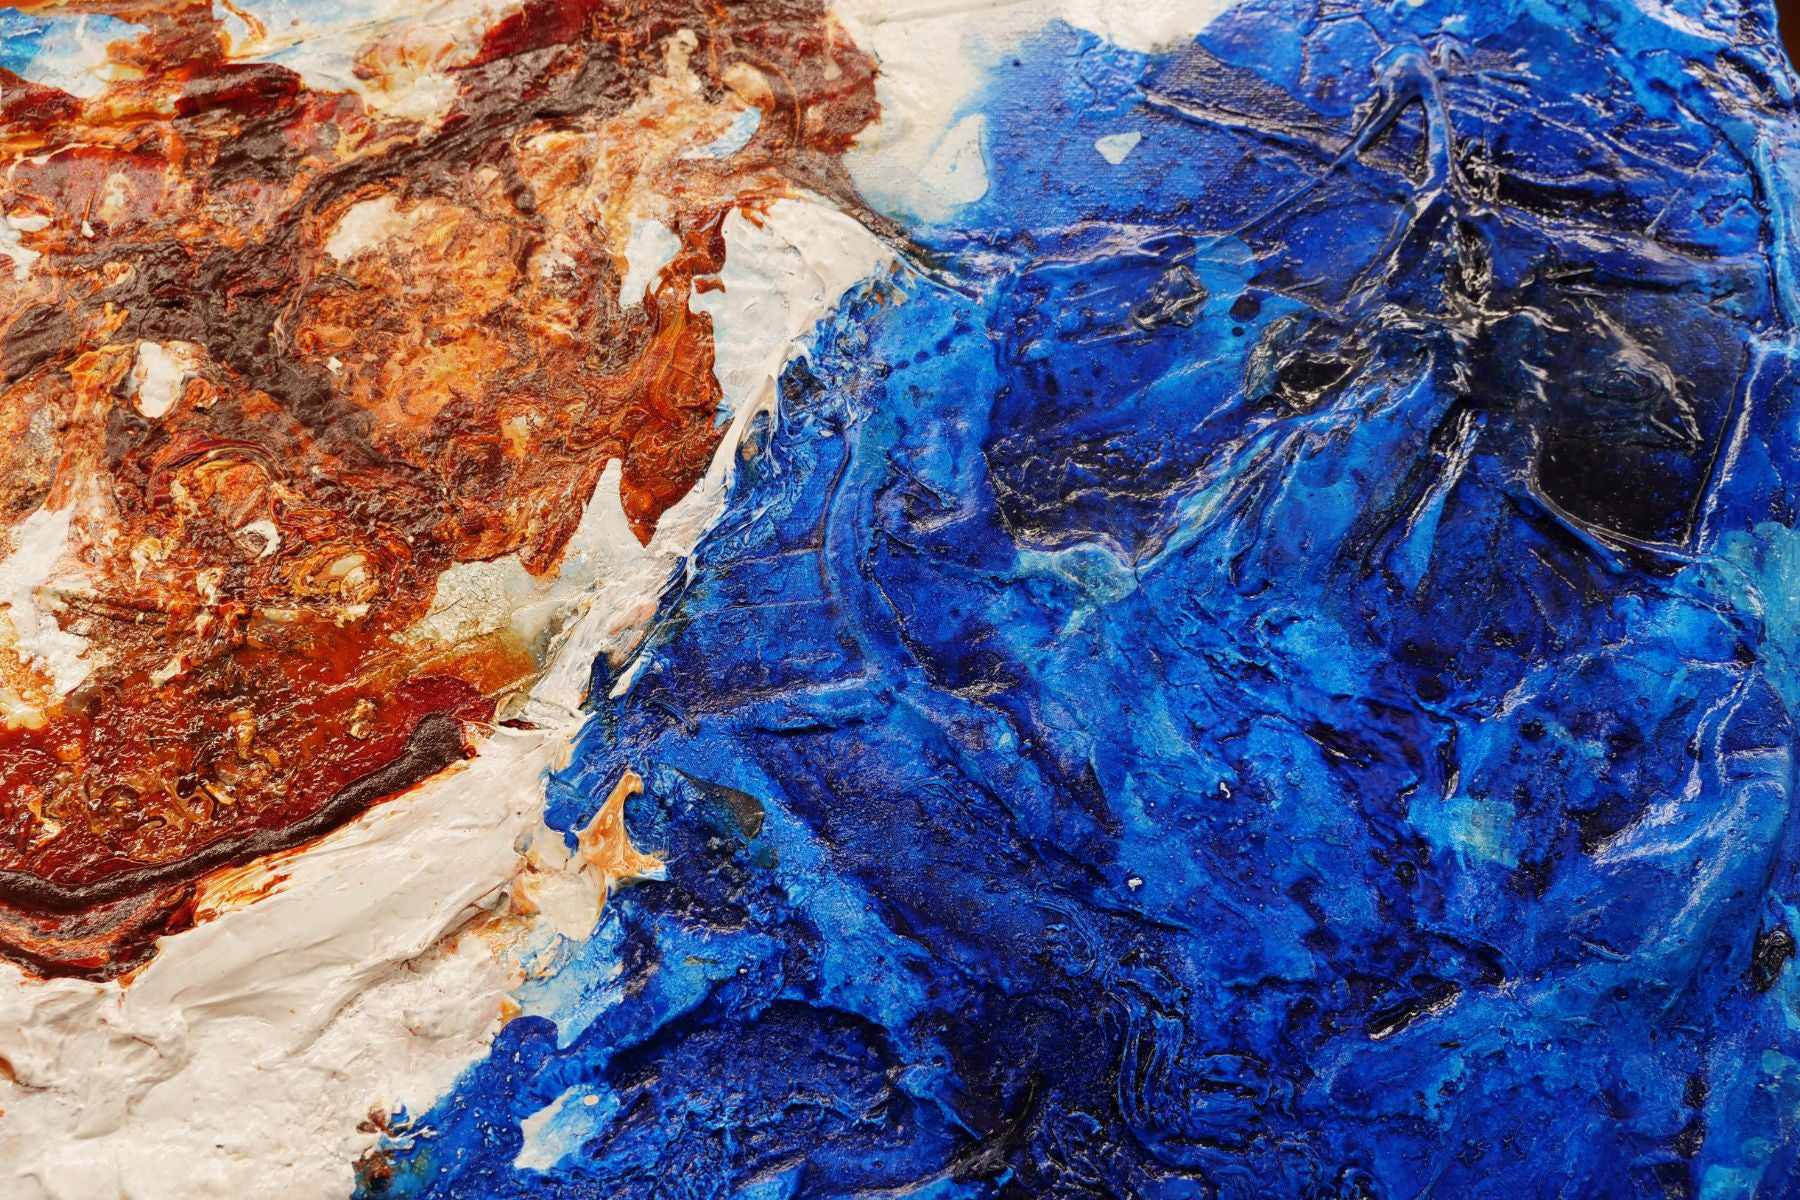 Rusted Embargo 140cm x 100cm Blue White Rust Textured Abstract Painting (SOLD)